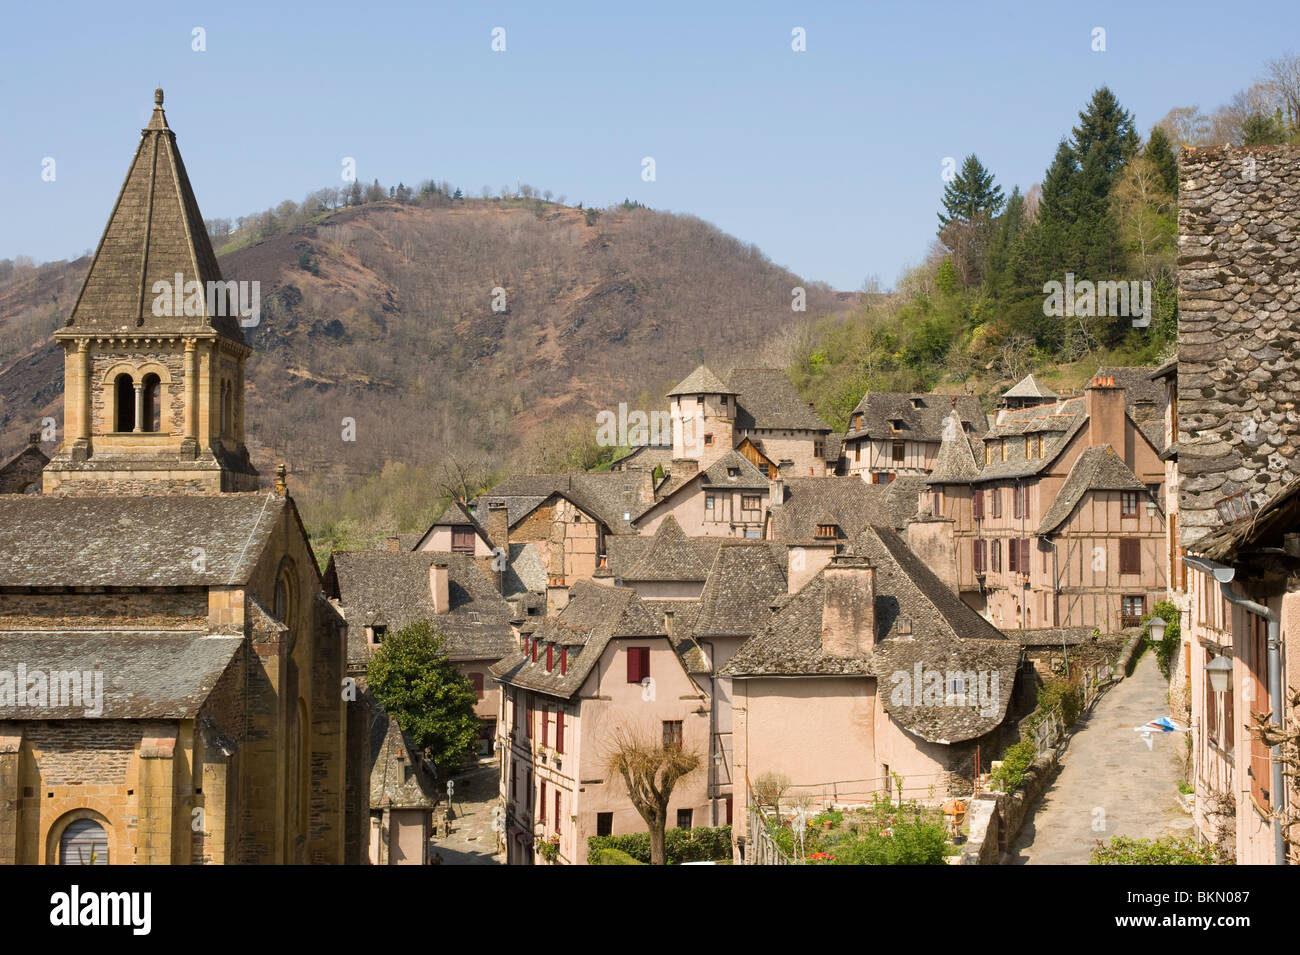 The Church of St Foy with Ancient Romanesque Architecture in the Historic Town of Conques Aveyron Midi-Pyrenees France Stock Photo